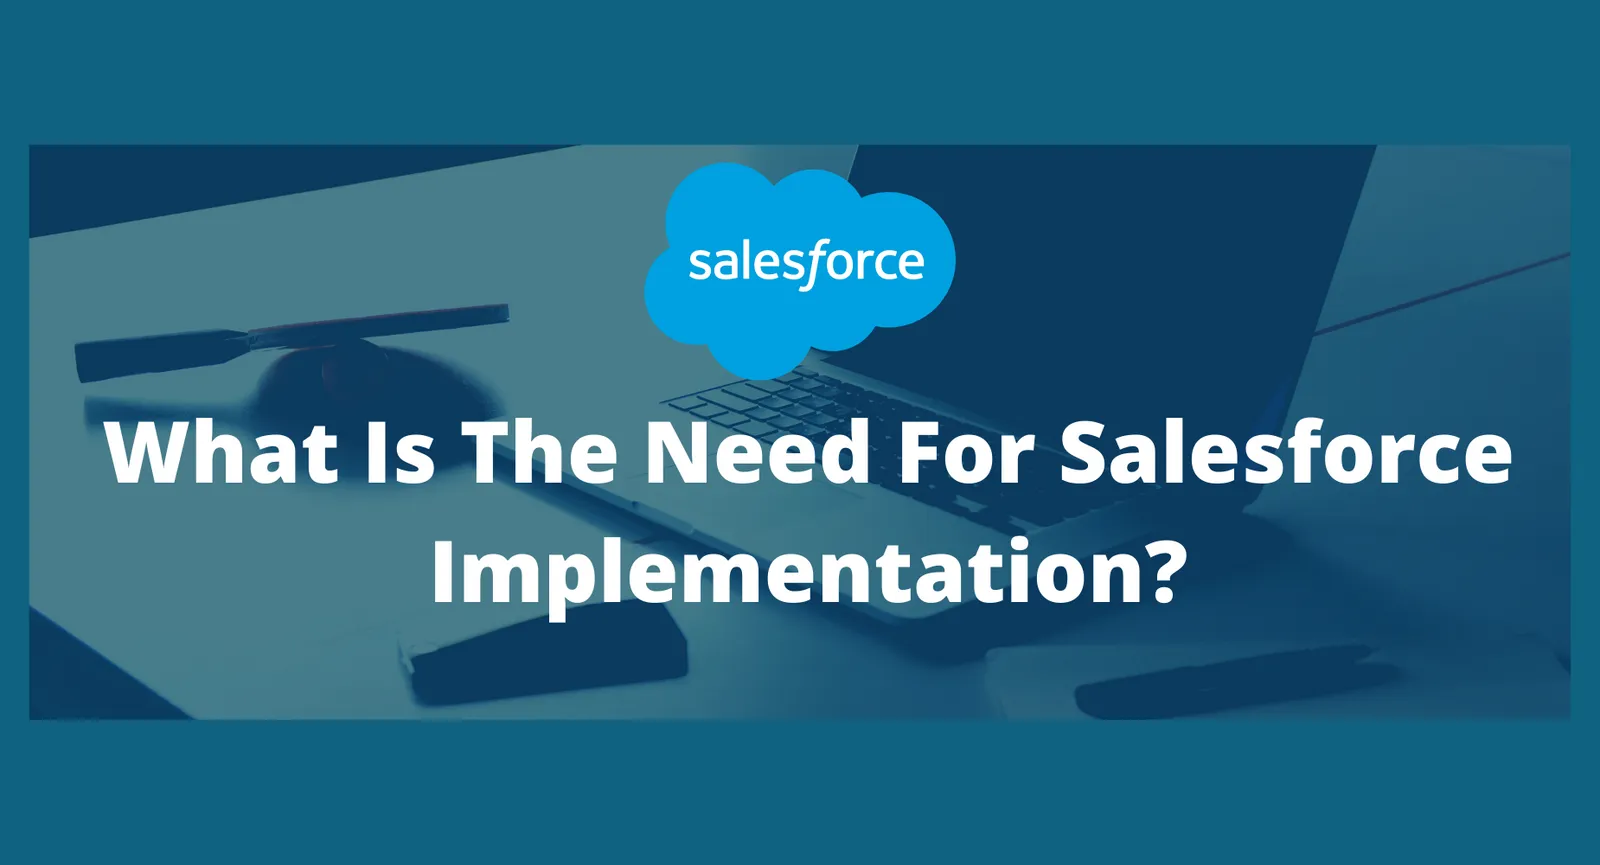 What Is The Need For Salesforce Implementation?